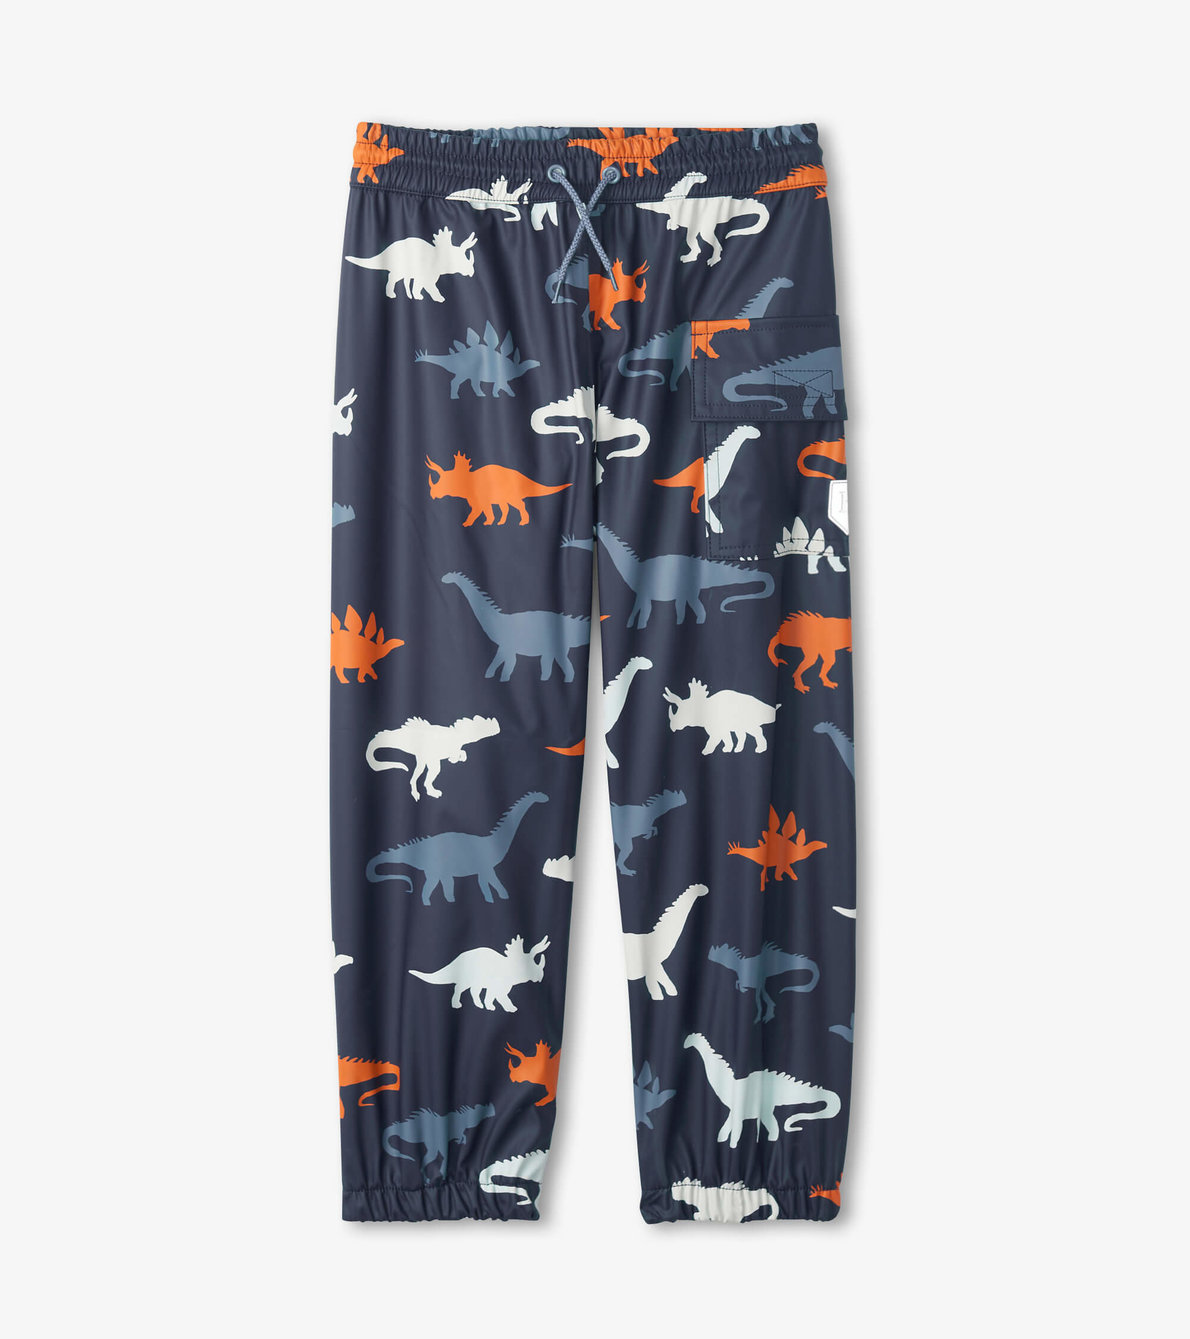 View larger image of Dino Silhouettes Colour Changing Kids Rain Pants